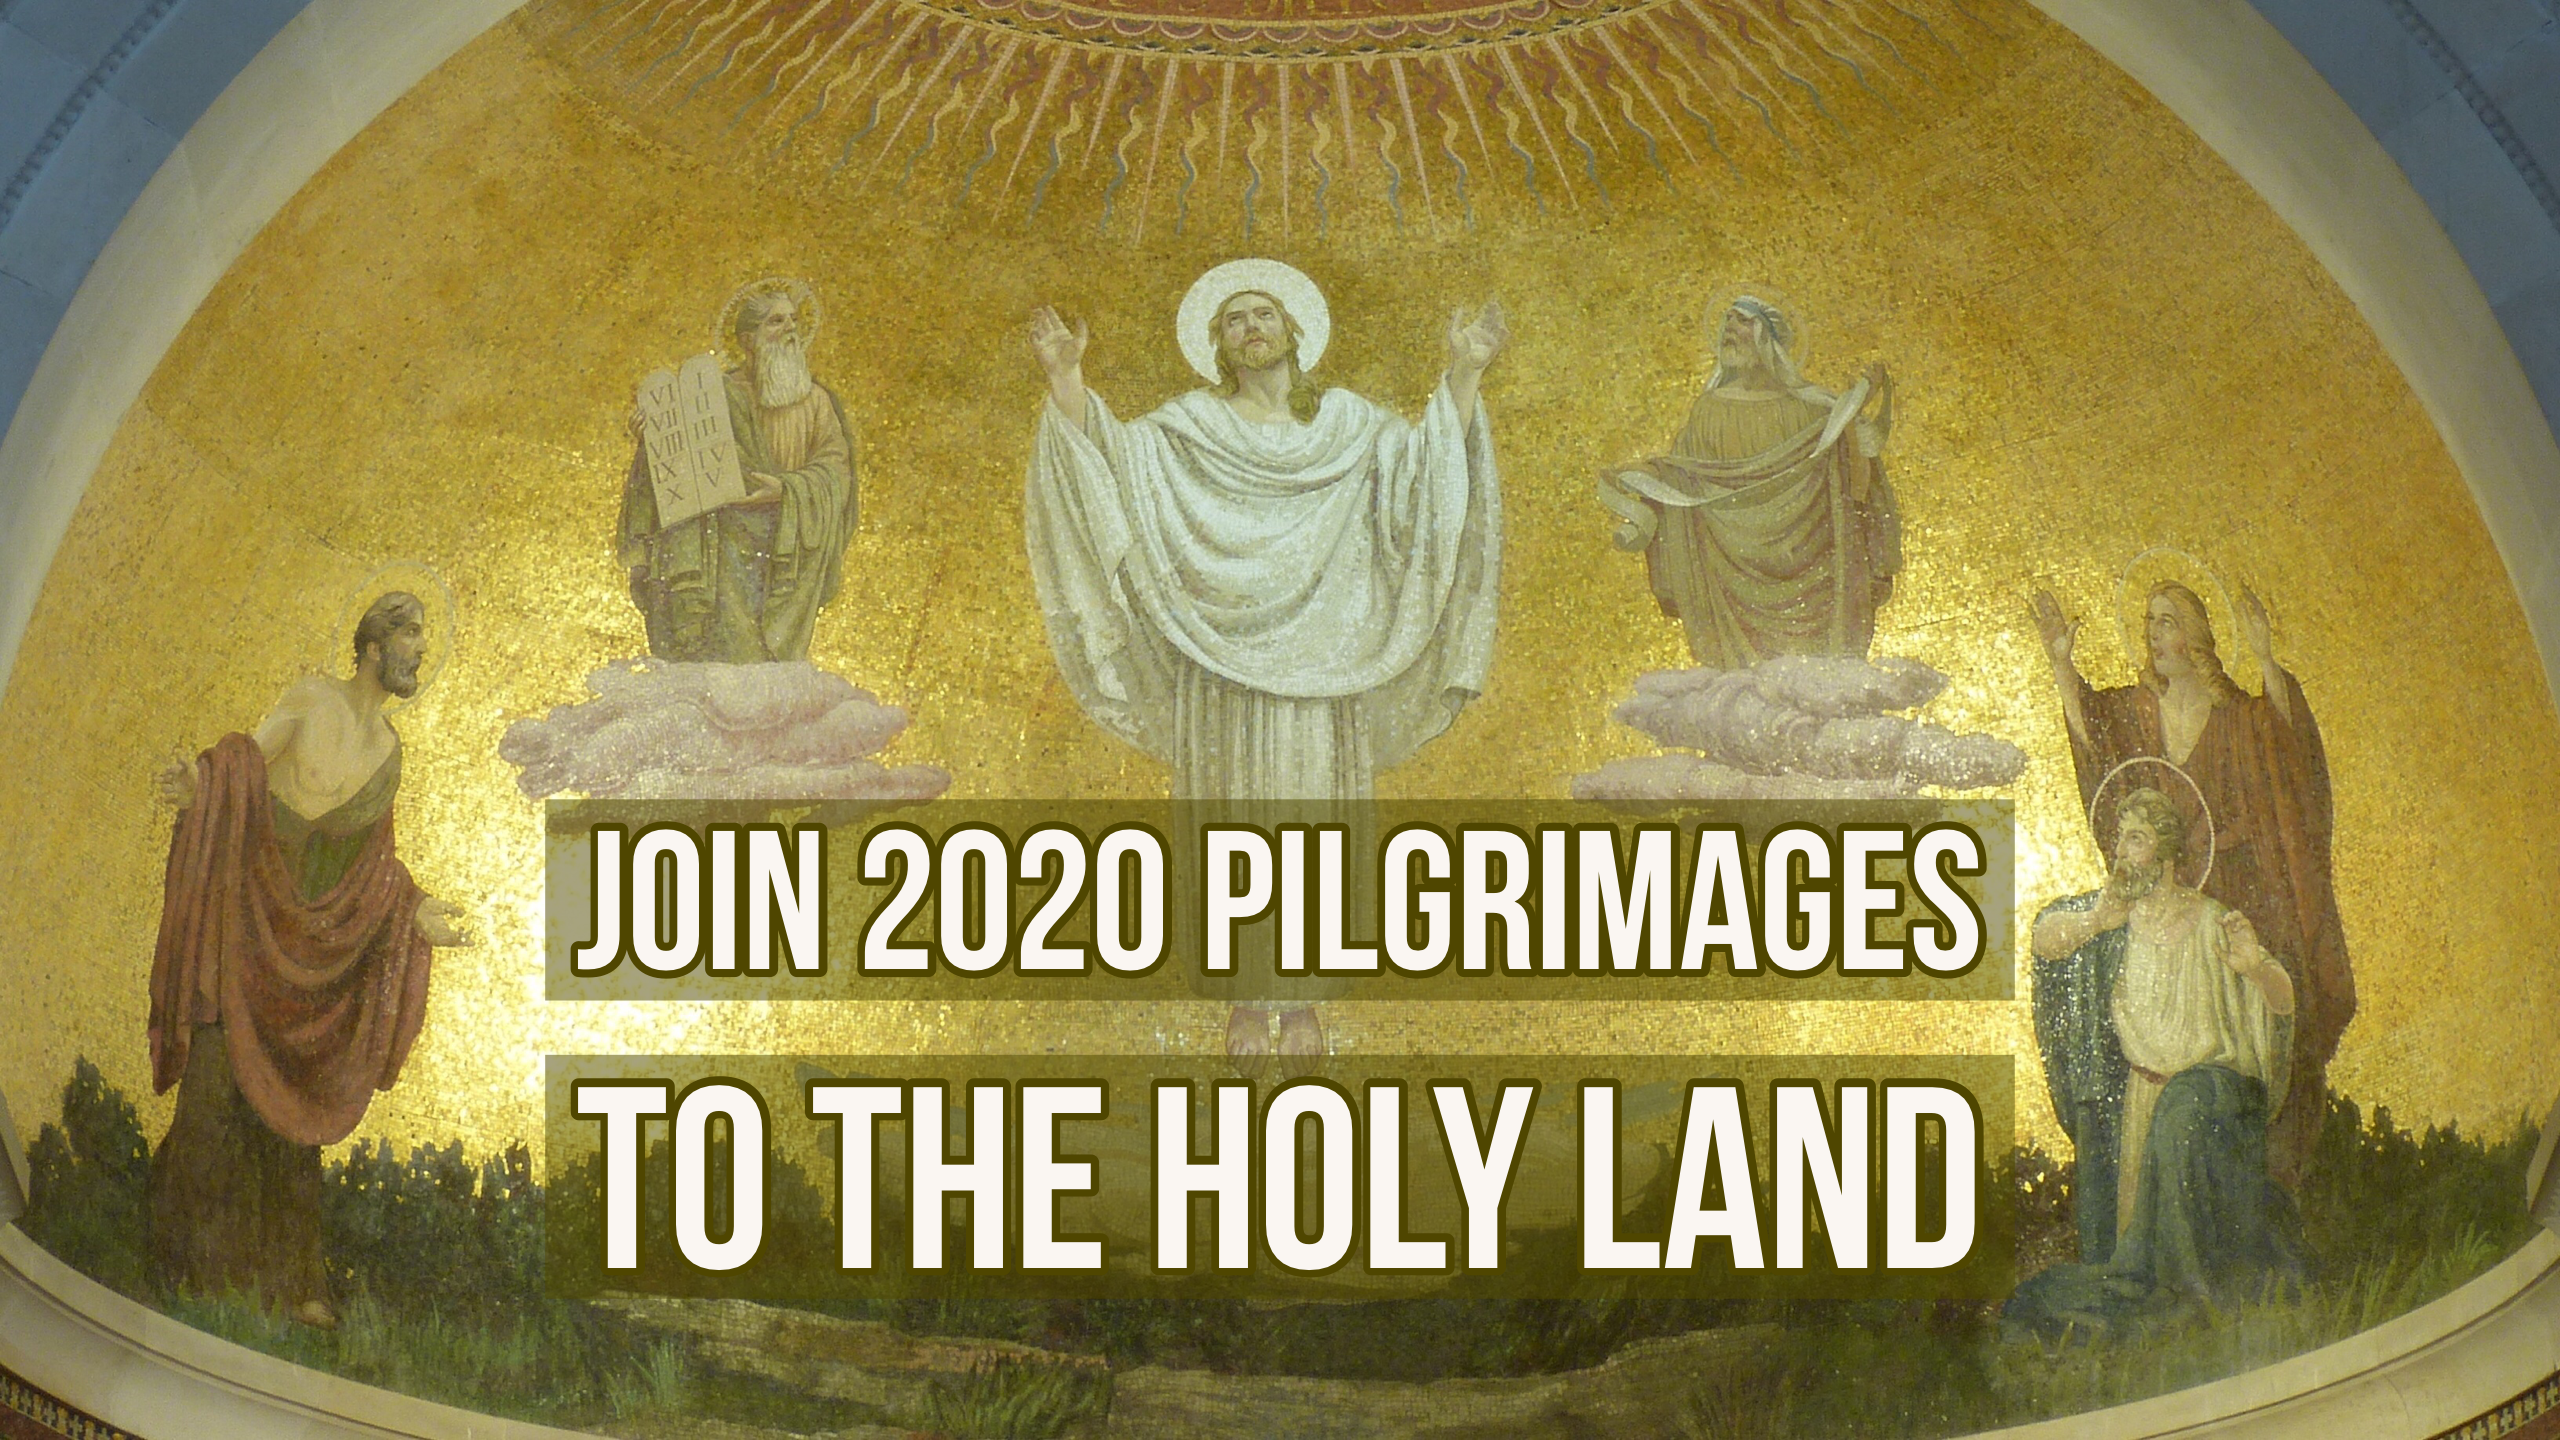 Join 2020 Pilgrimages to the Holy Land